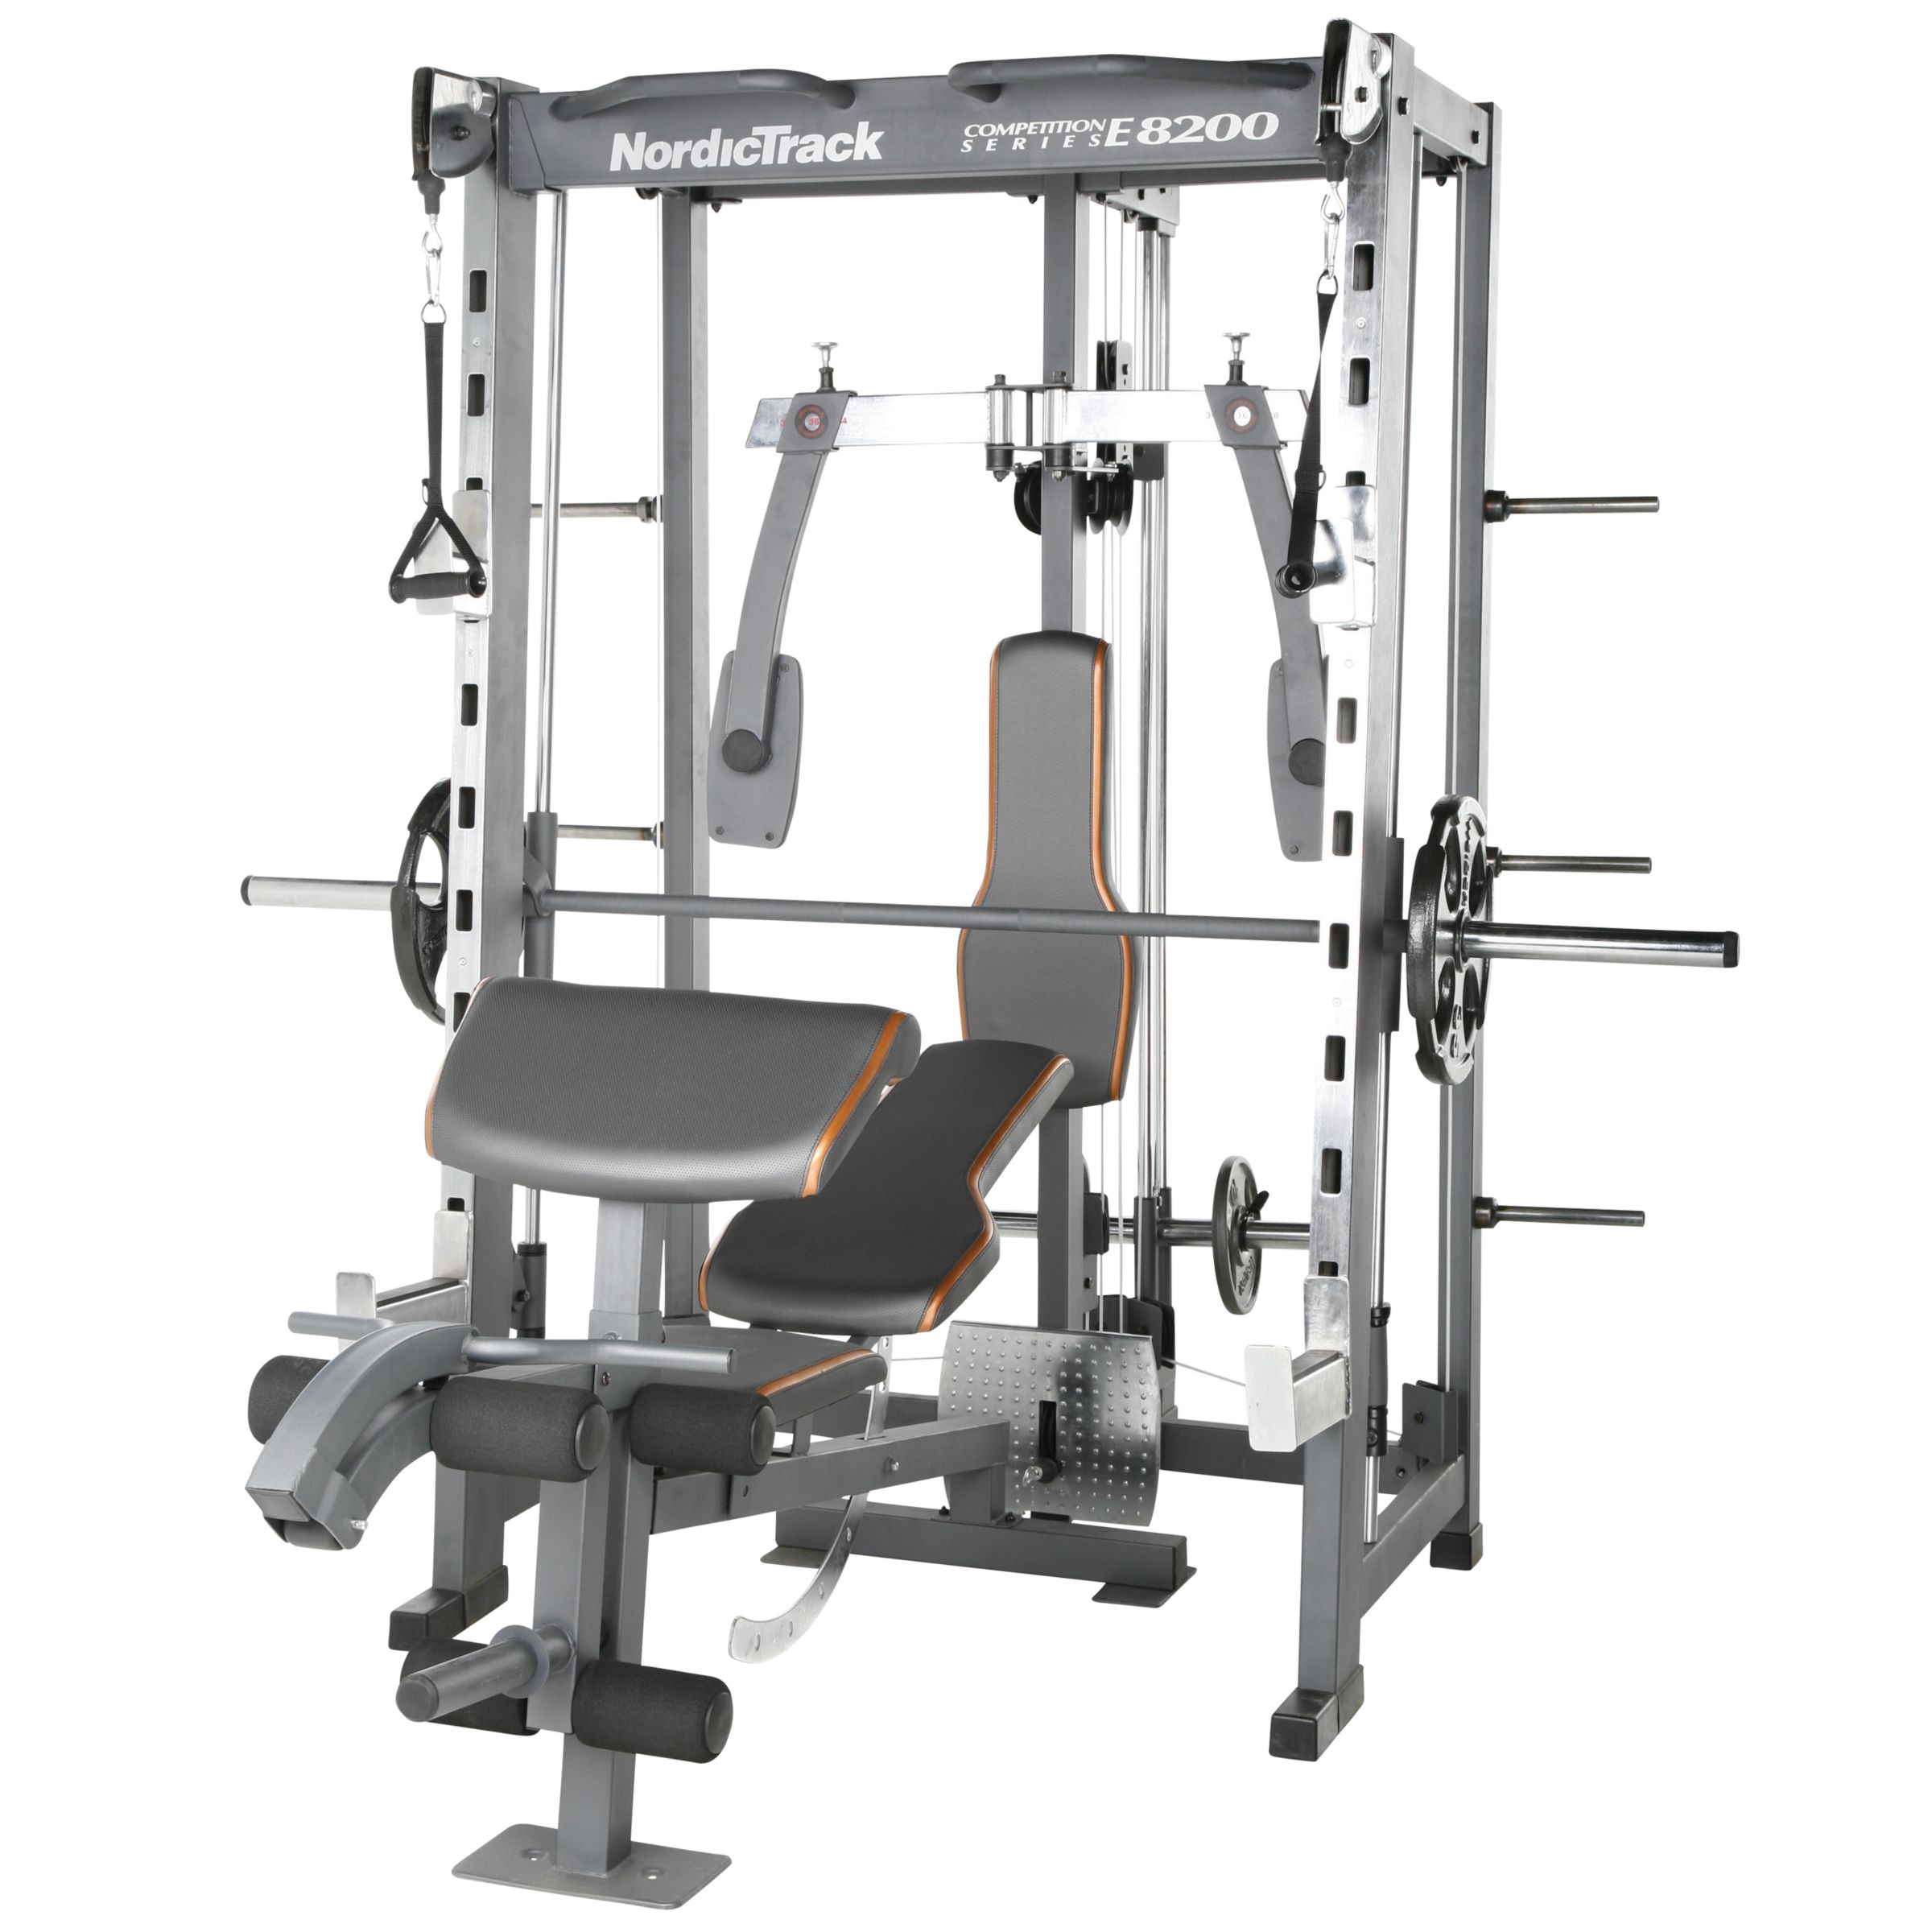 NordicTrack E8200 Competition Series Smith Machine at John Lewis